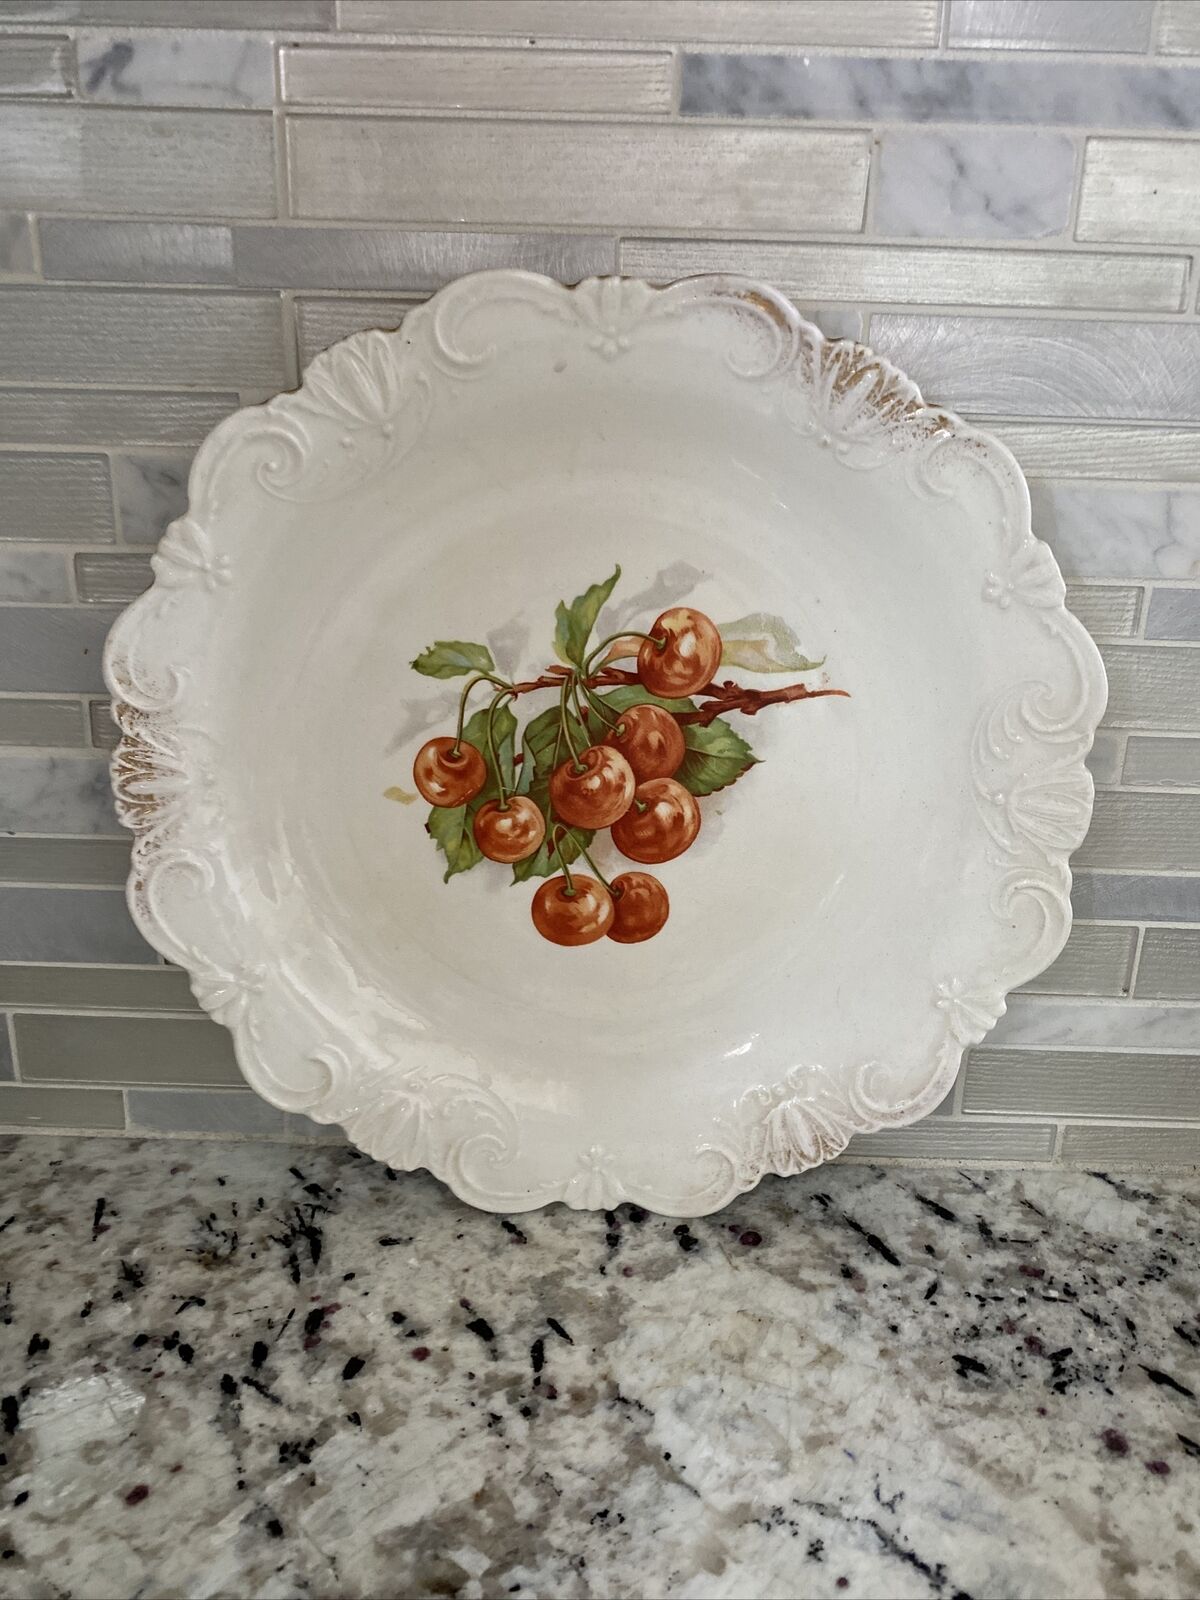 Beautiful Gold Rimmed Dresden Plate With Cherry Fruit Motif